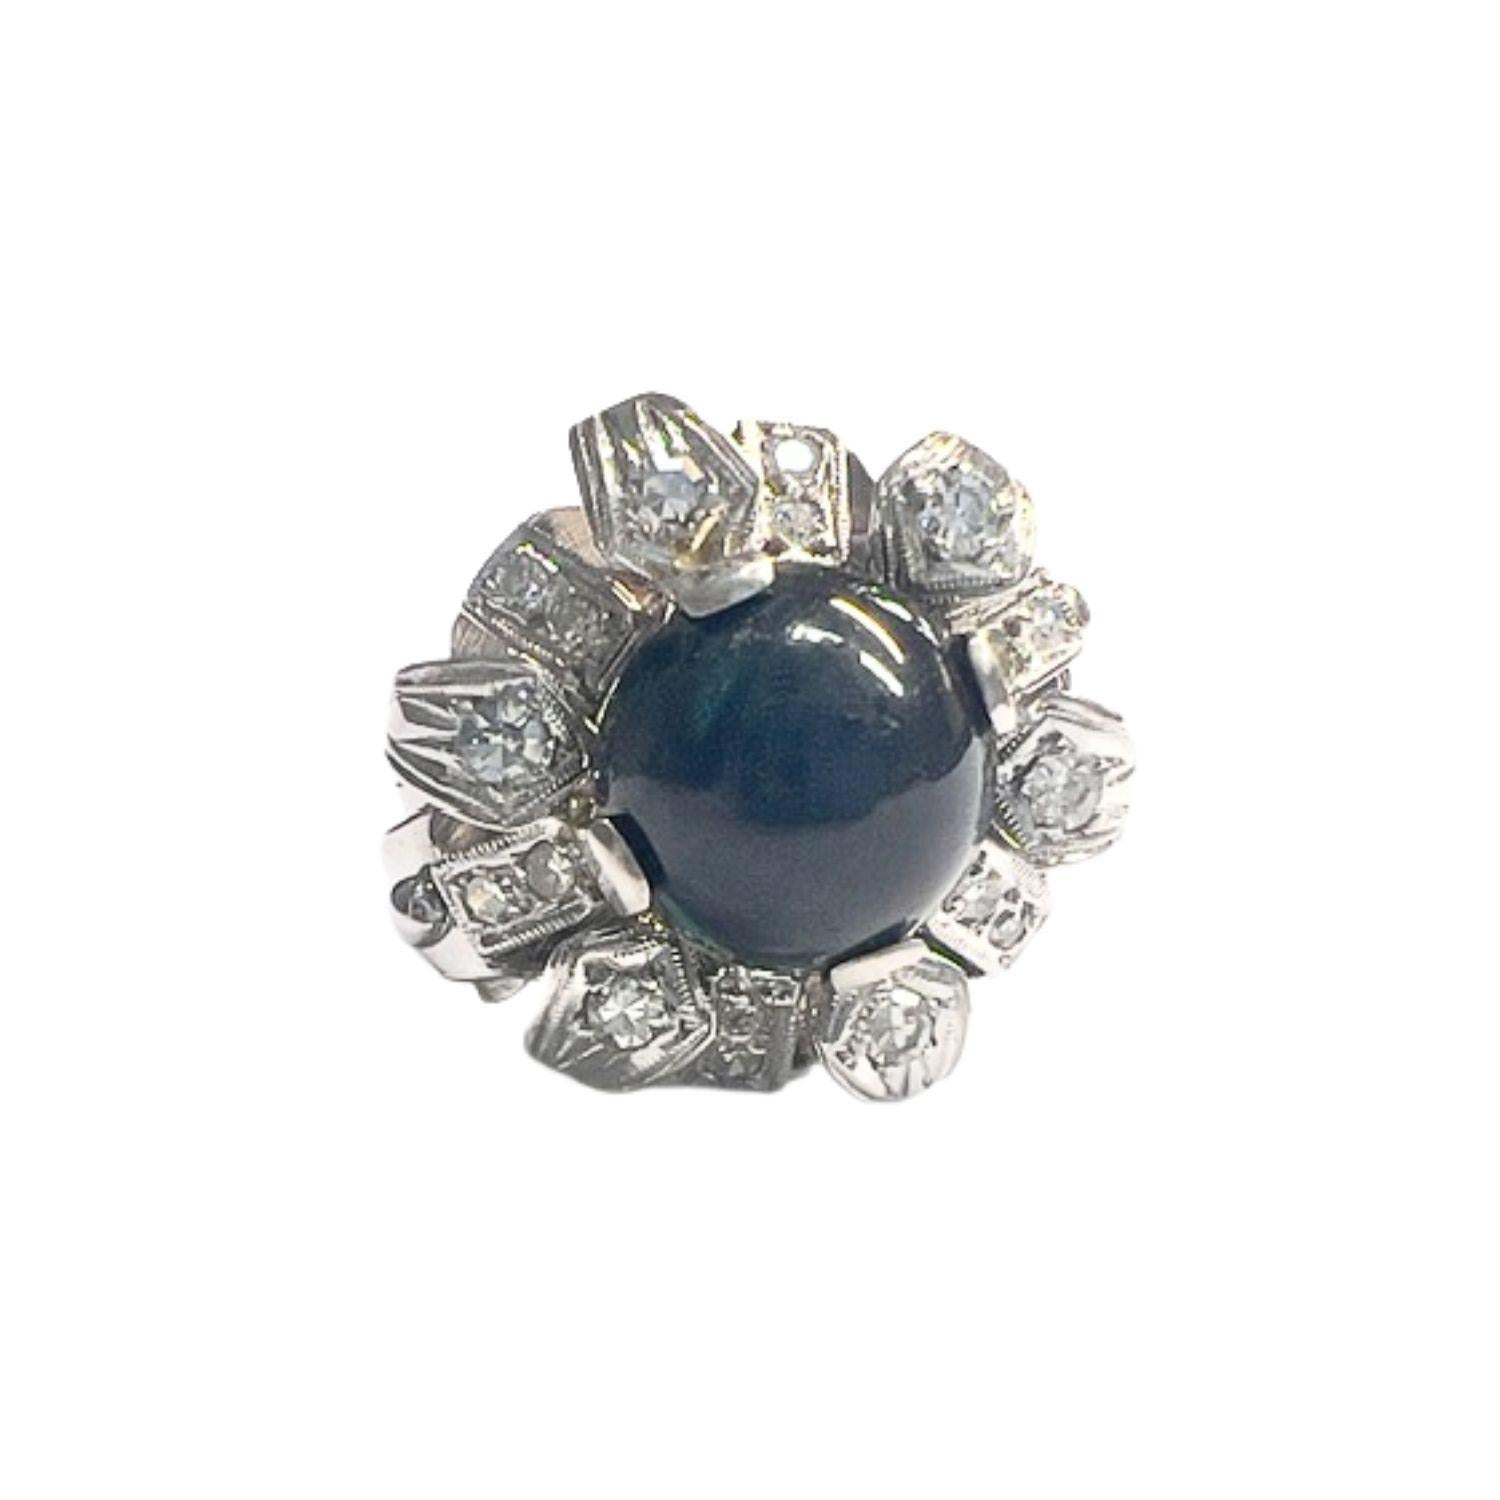 1930s-1935 Art Deco with Diamonds and Diffusion-Treated Sapphires 18k Gold Ring In Good Condition For Sale In MADRID, ES